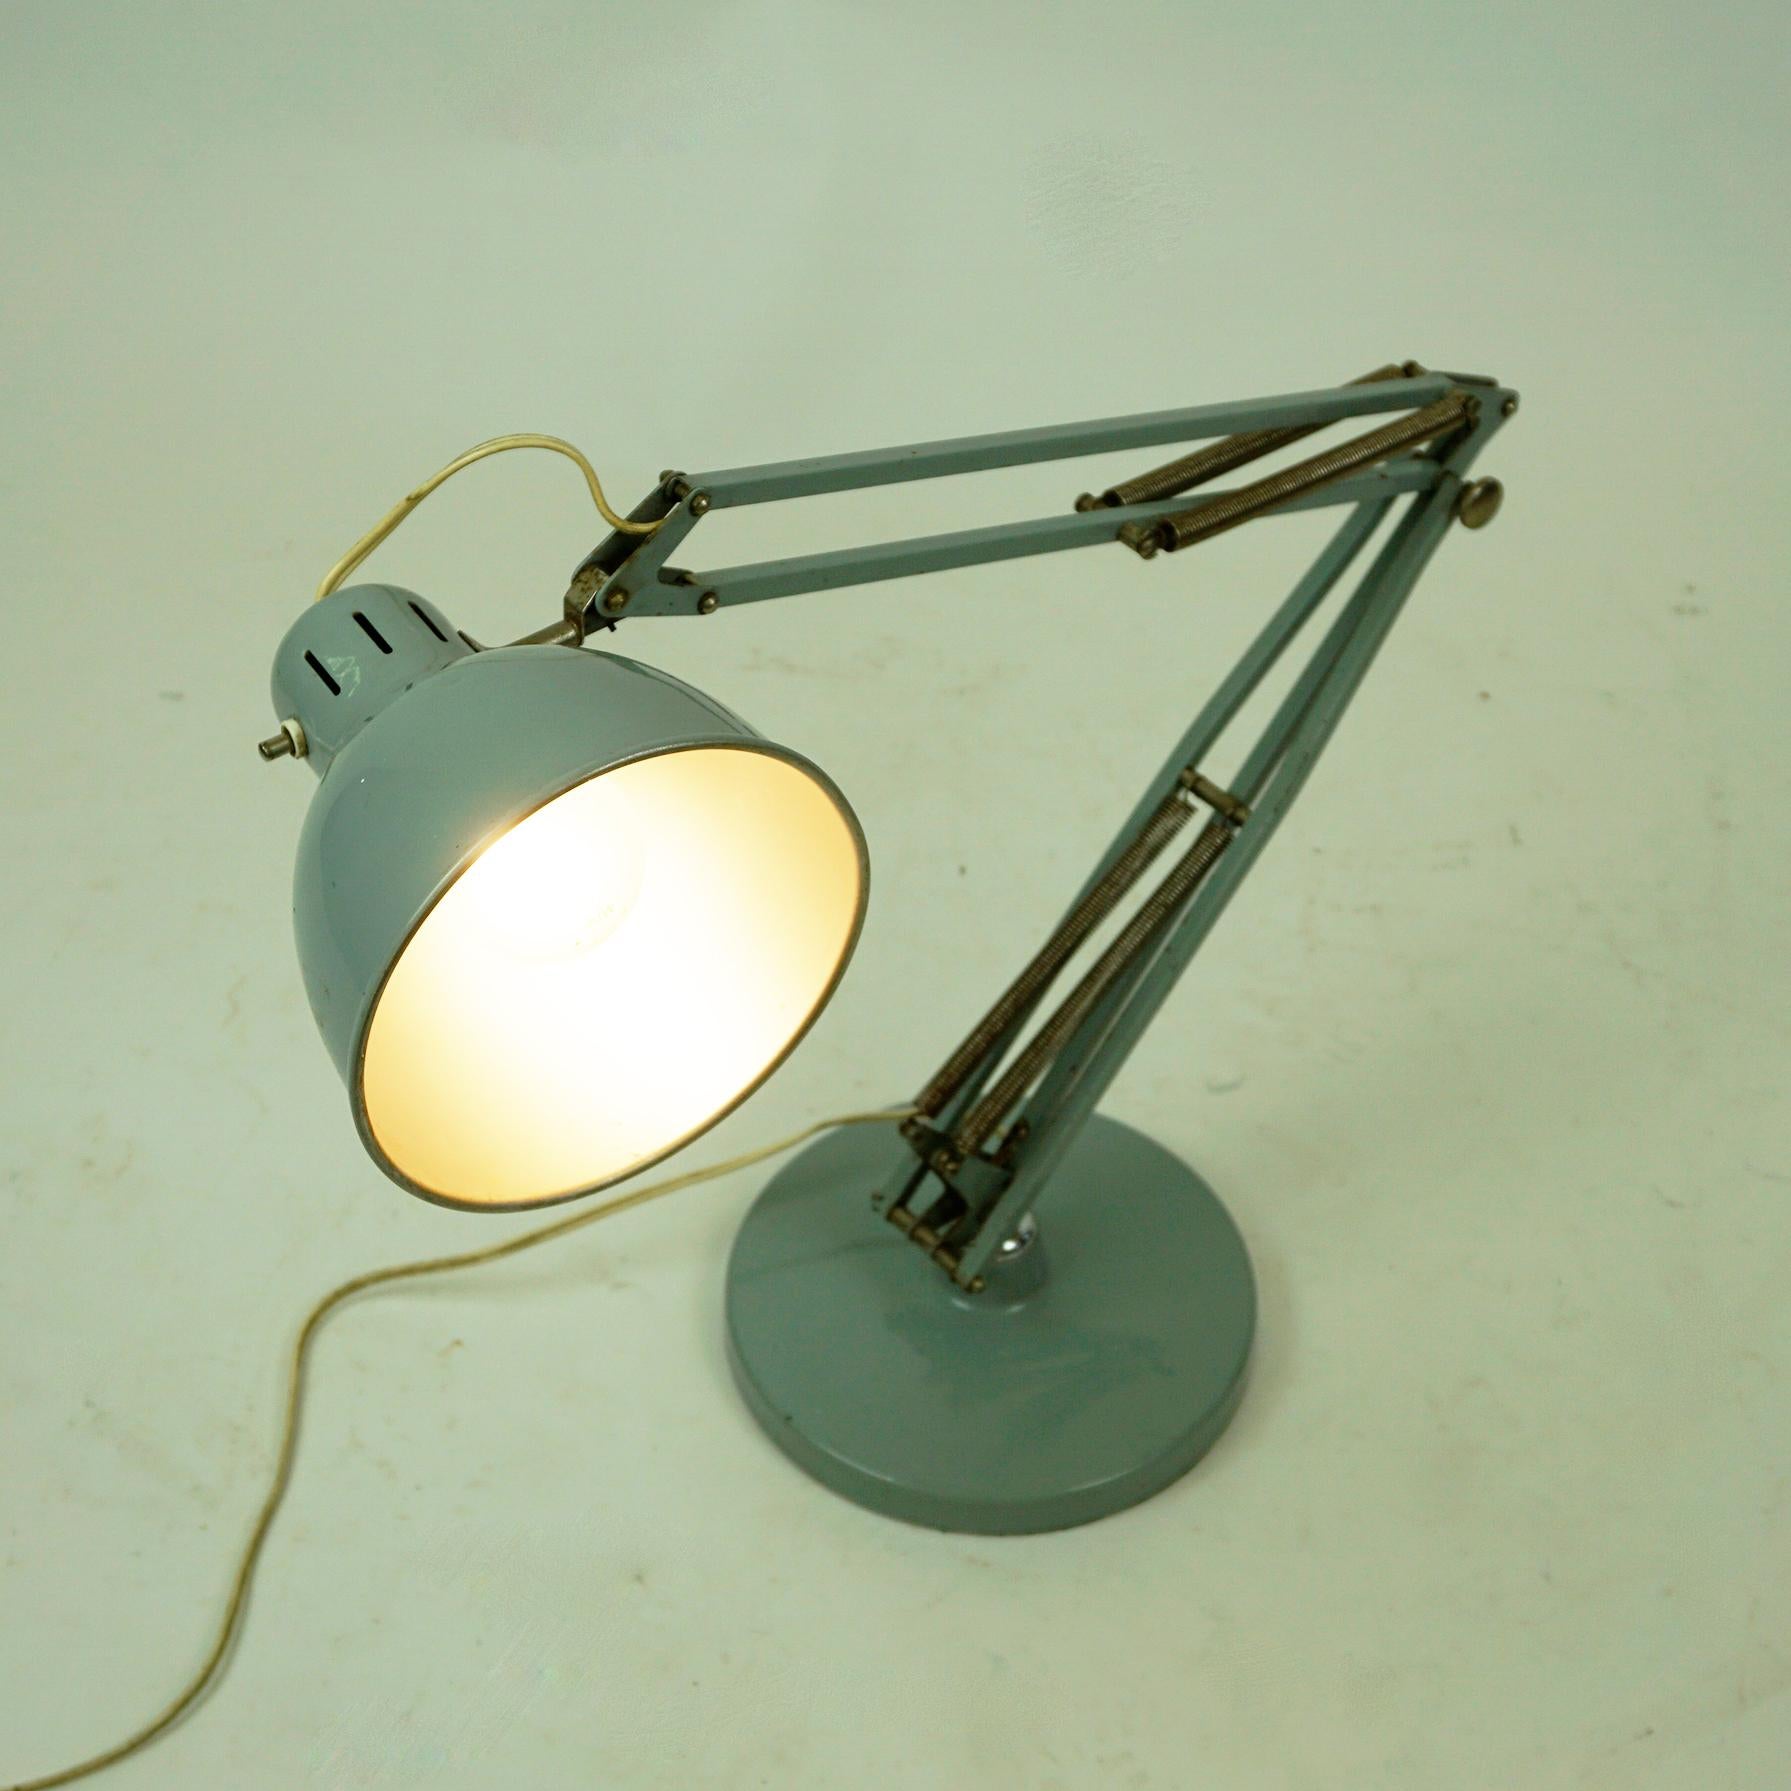 Norwegian Light Blue Architect Desk or Table Lamp L4 by Jac Jacobsen for Luxo Norway